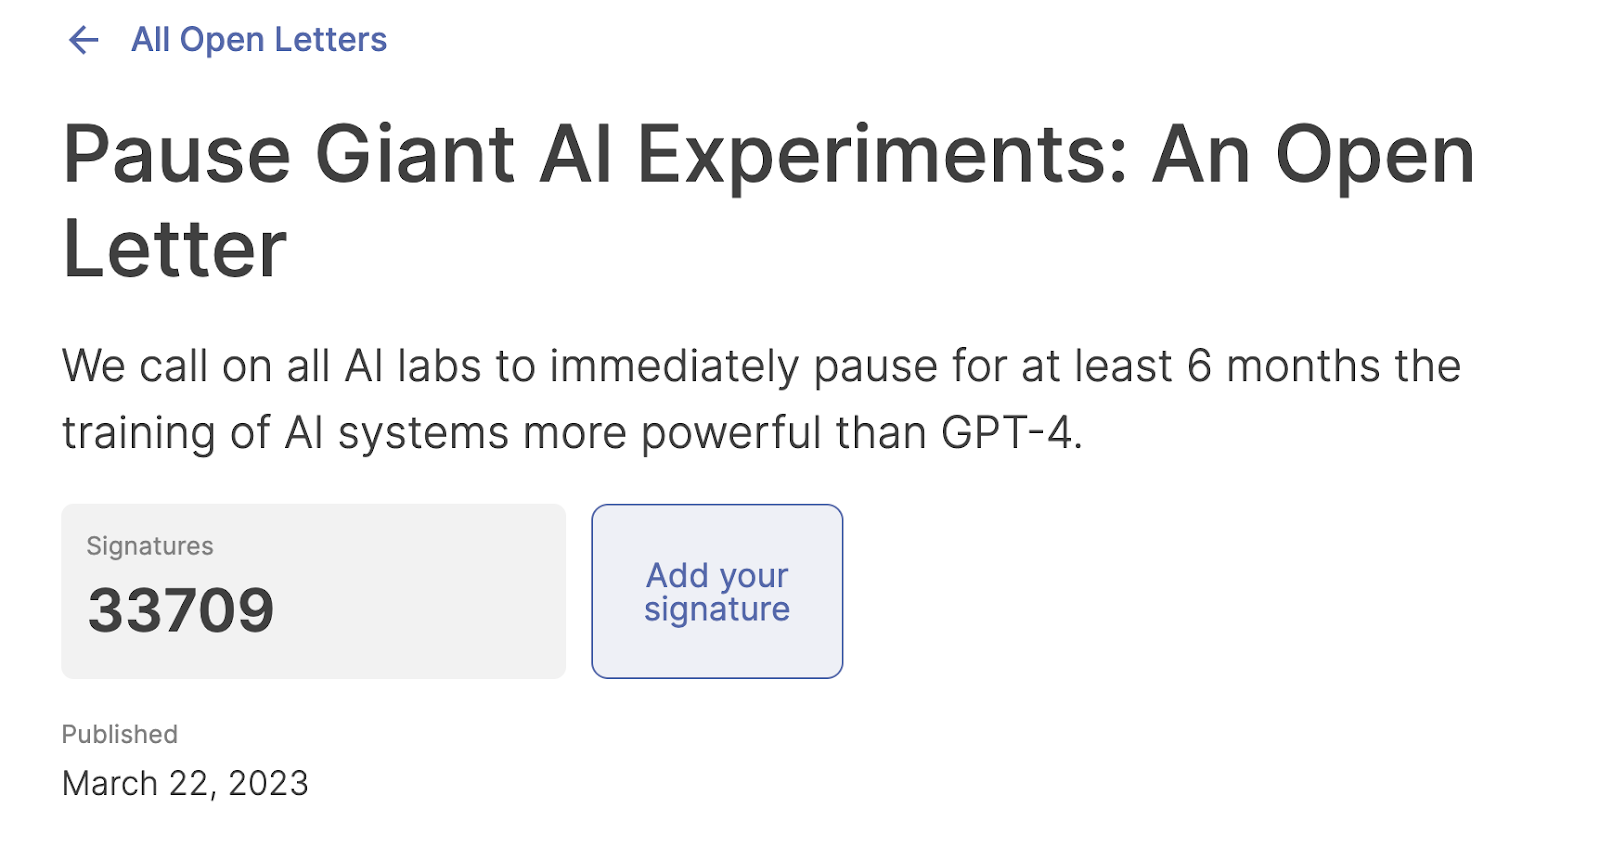 <a href="https://futureoflife.org/open-letter/pause-giant-ai-experiments/">Pause Giant AI Experiments: An Open Letter - Future of Life Institute</a>